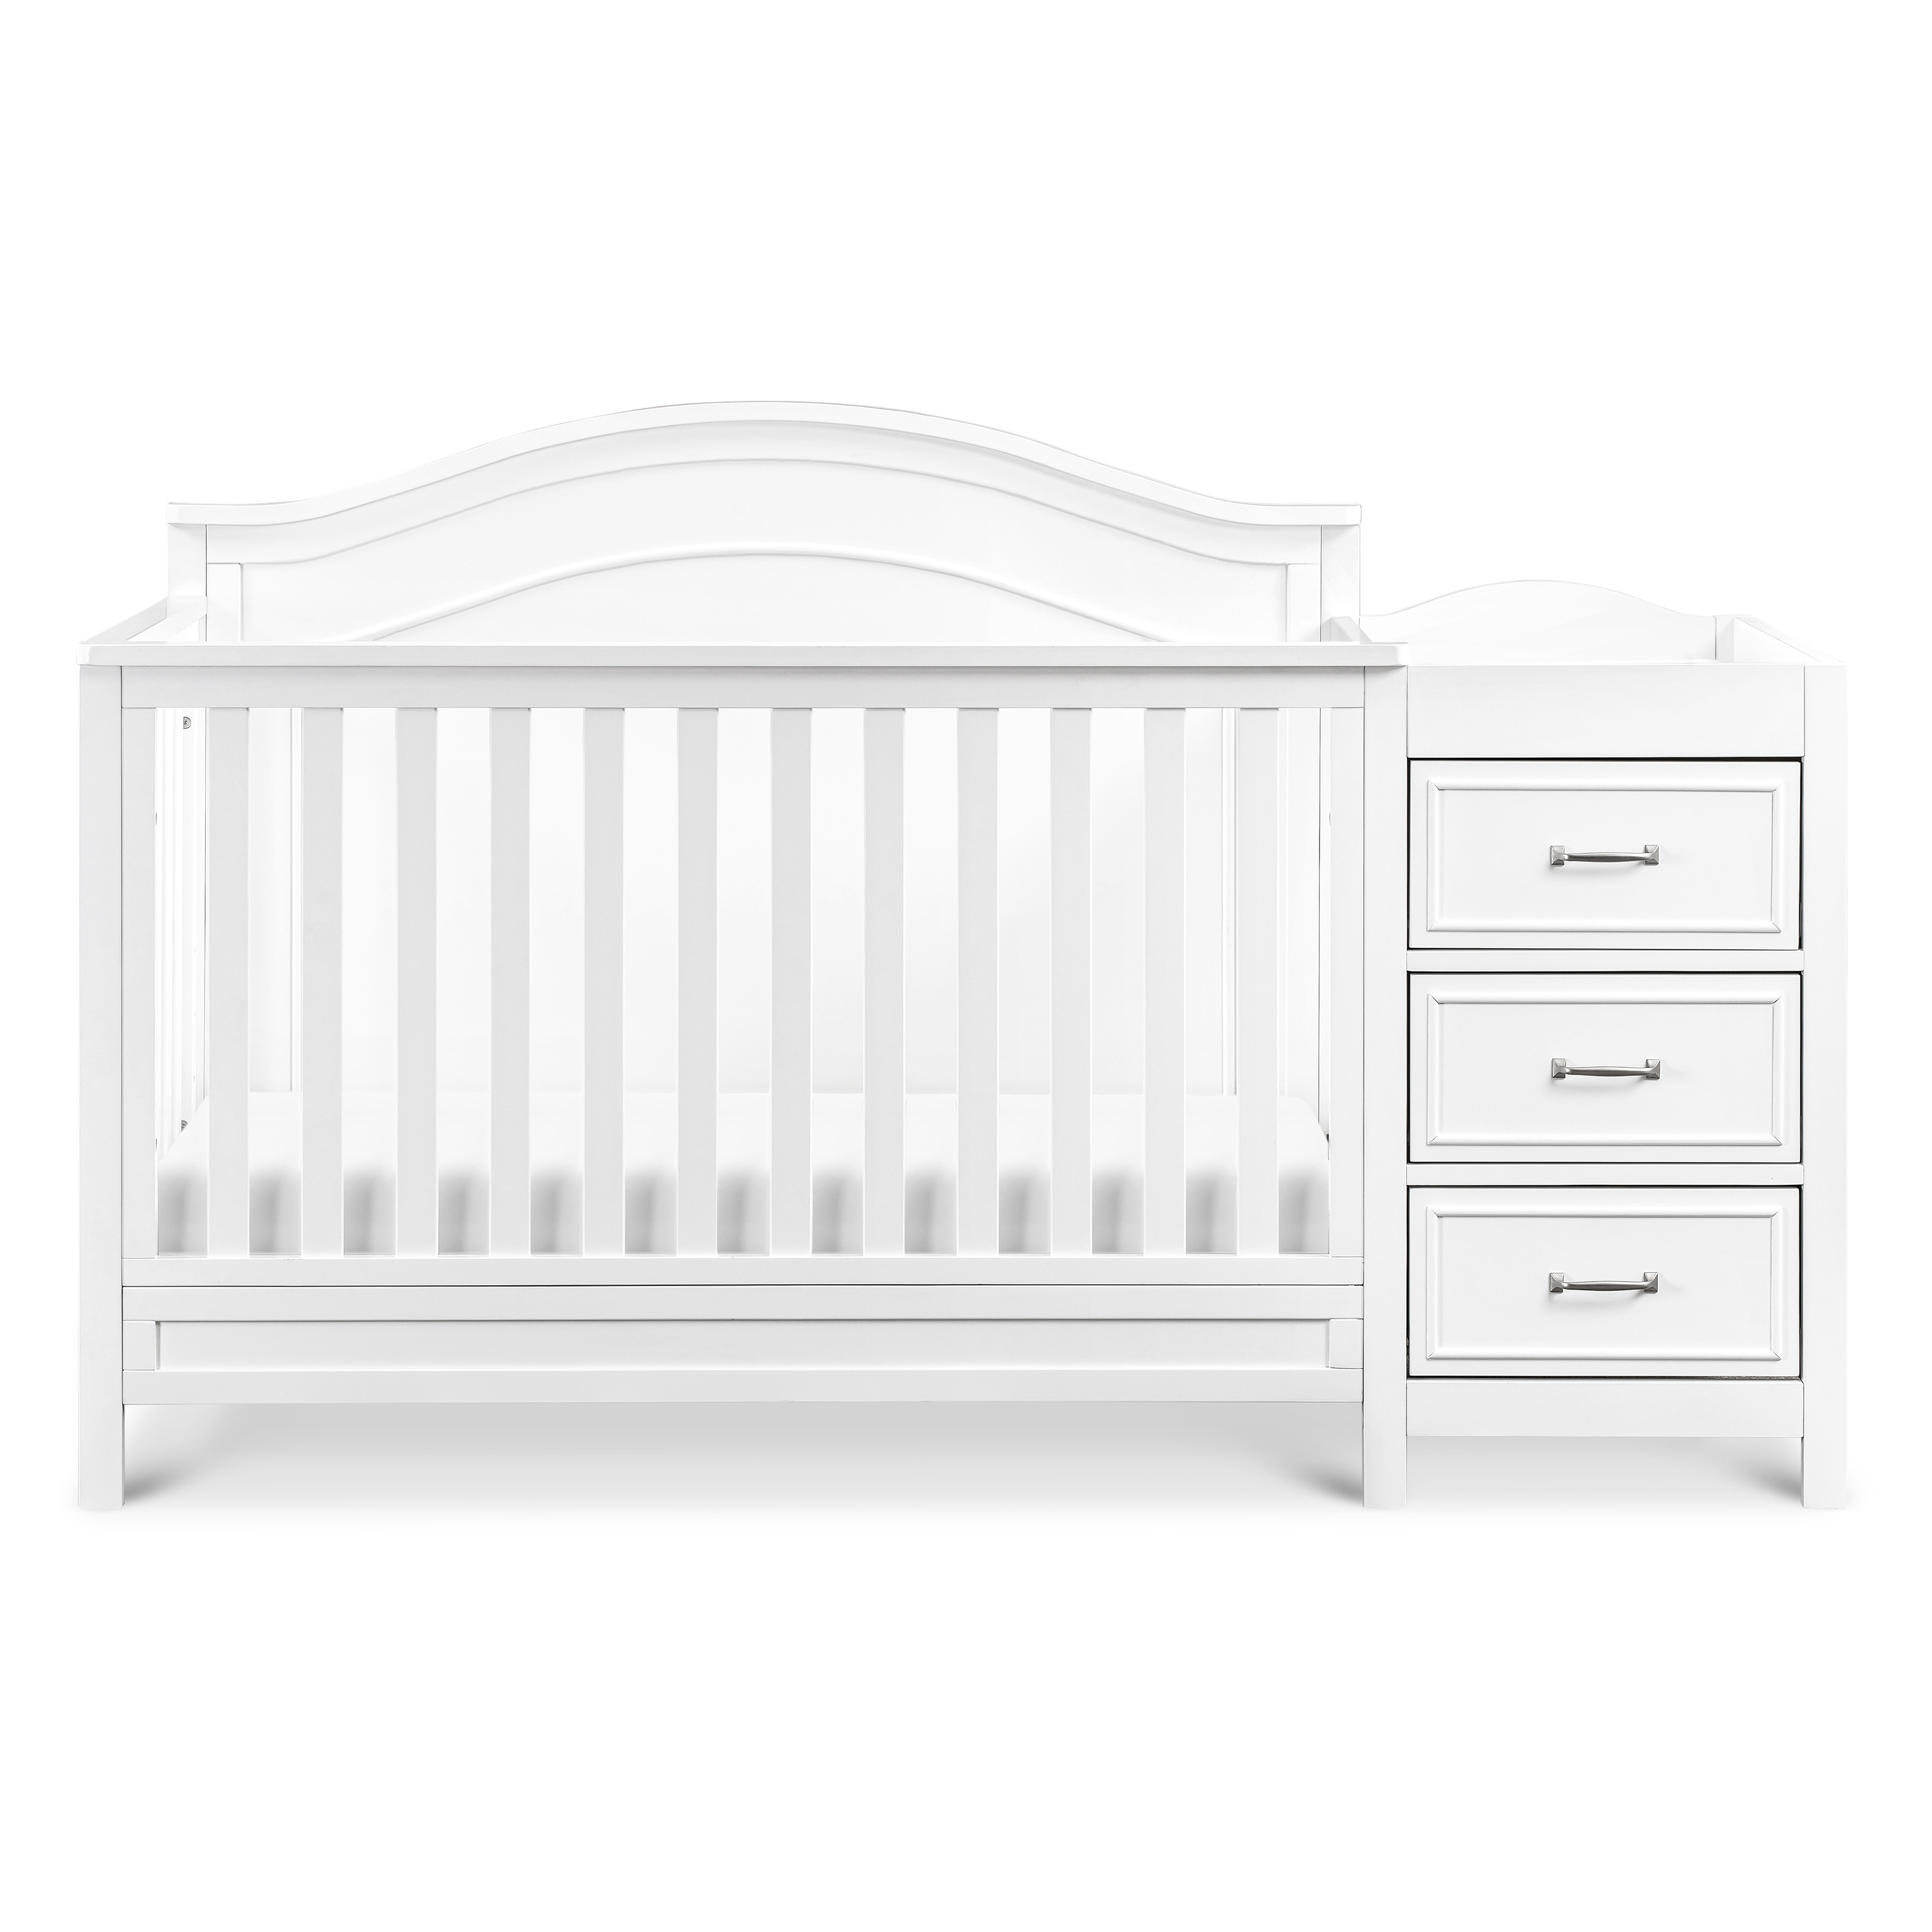 DaVinci Charlie 4-in-1 Convertible Crib and Changer Combo in White - image 3 of 11